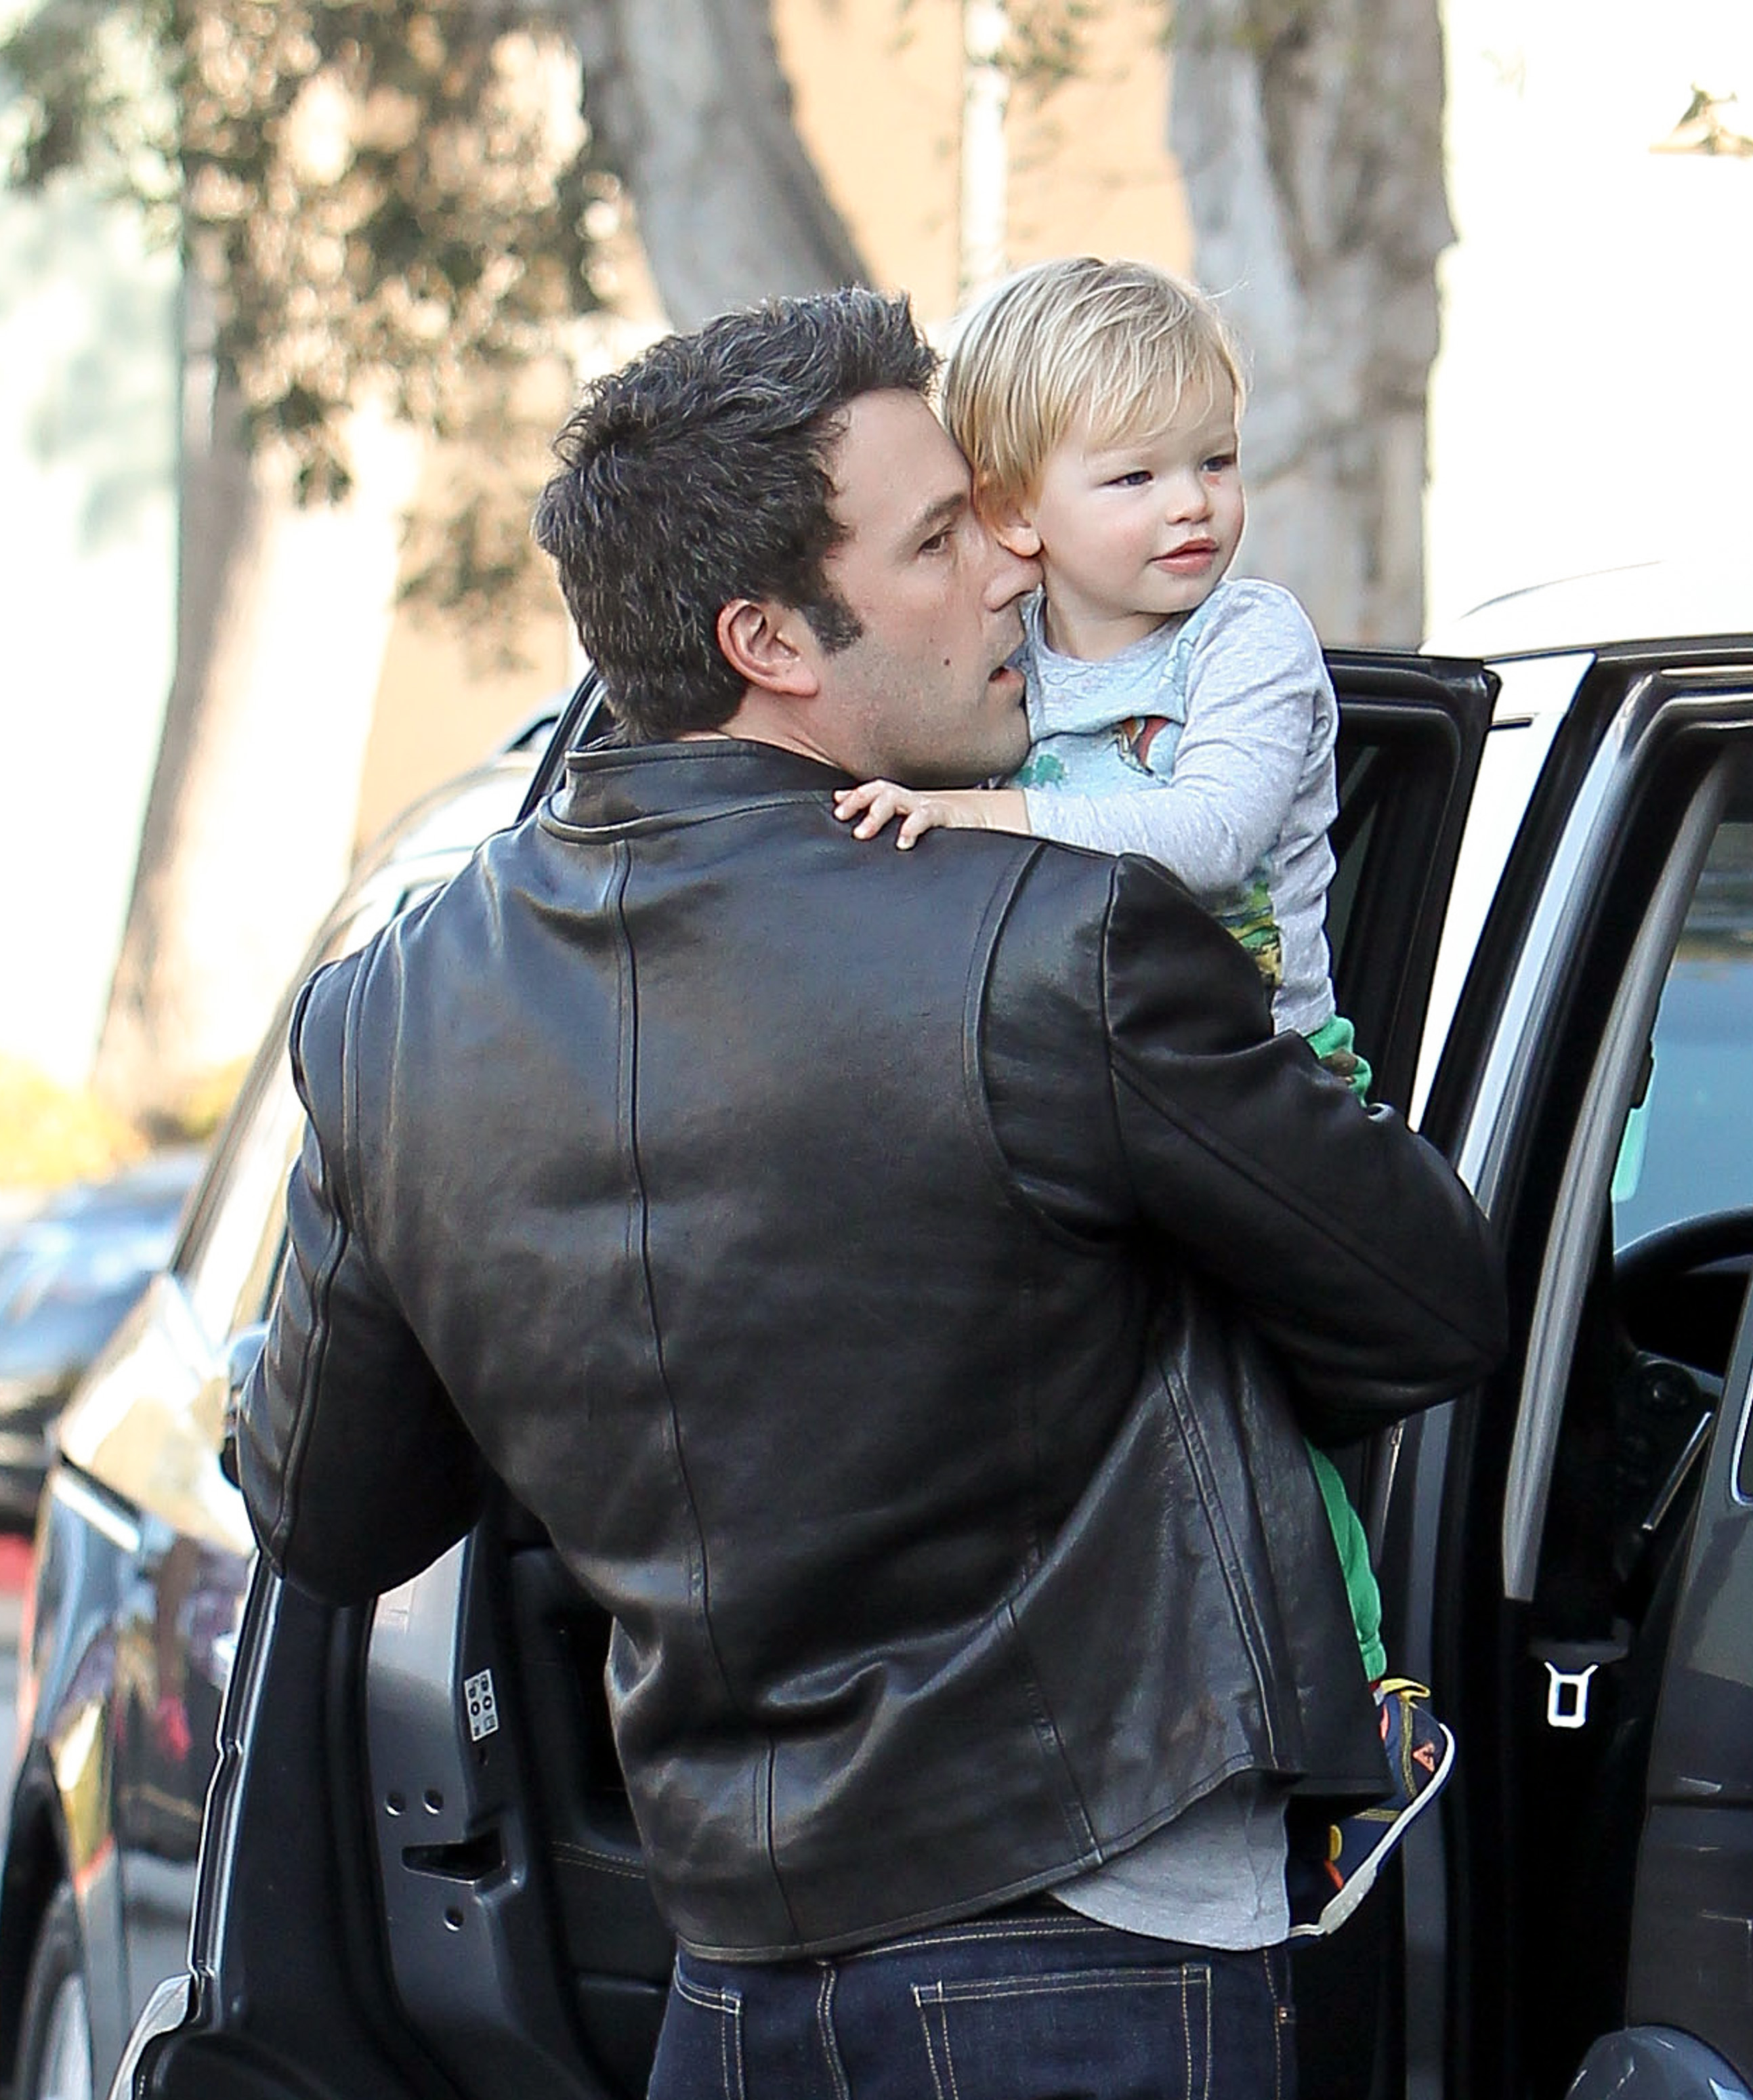 Ben Affleck pictured with his son Samuel Affleck on November 9, 2013 in Los Angeles, California | Source: Getty Images